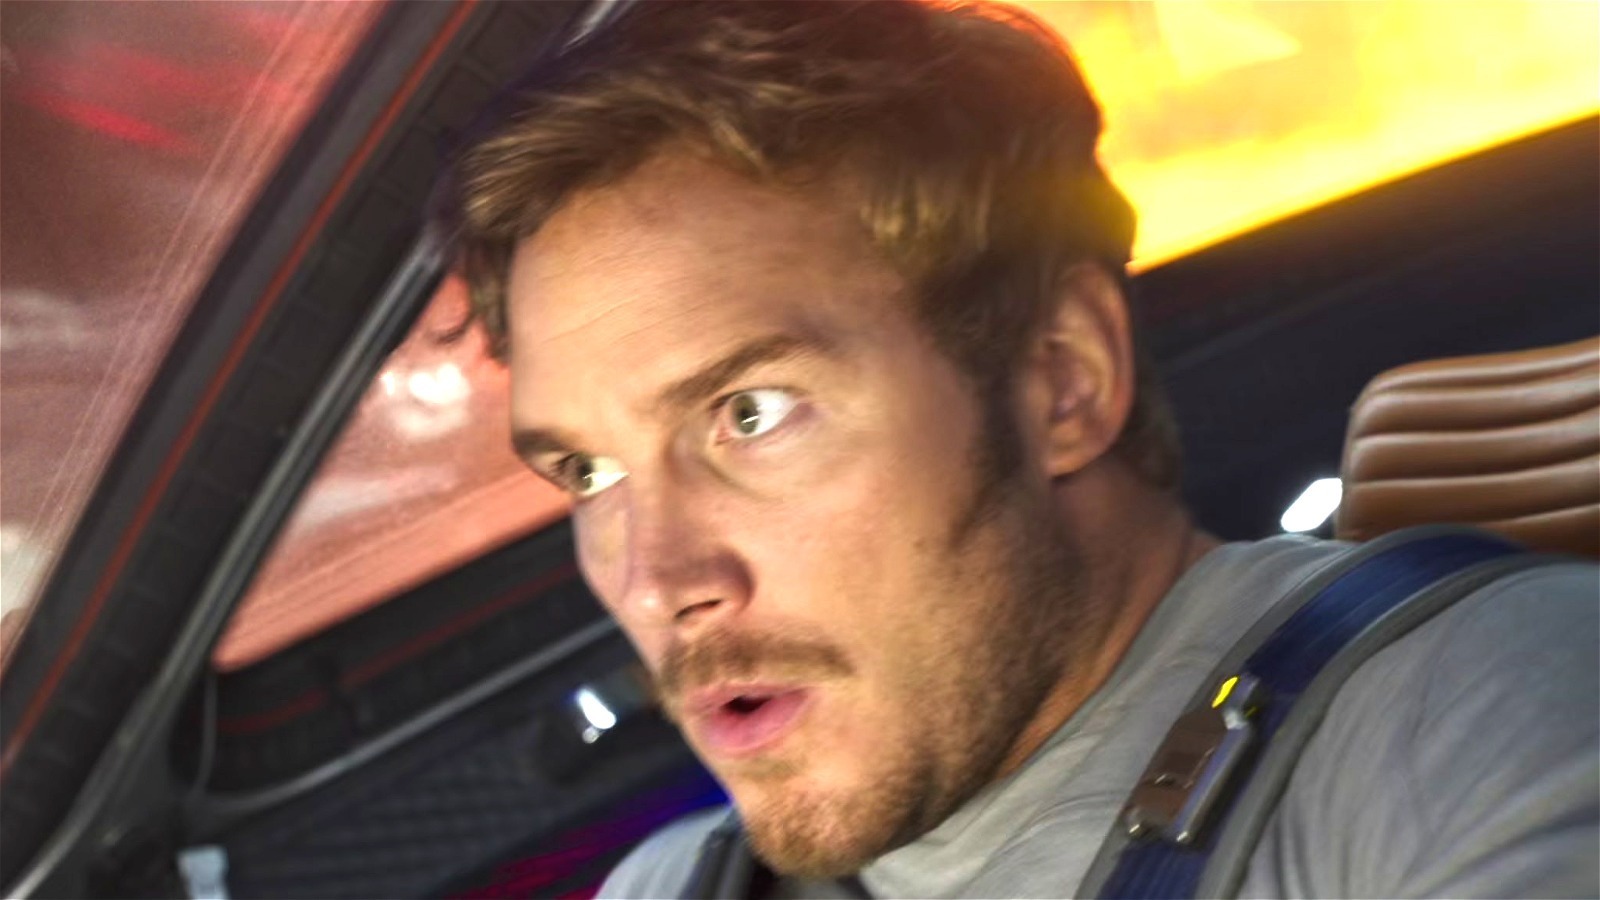 Does Star-Lord Still Have His Celestial Powers and How Does He